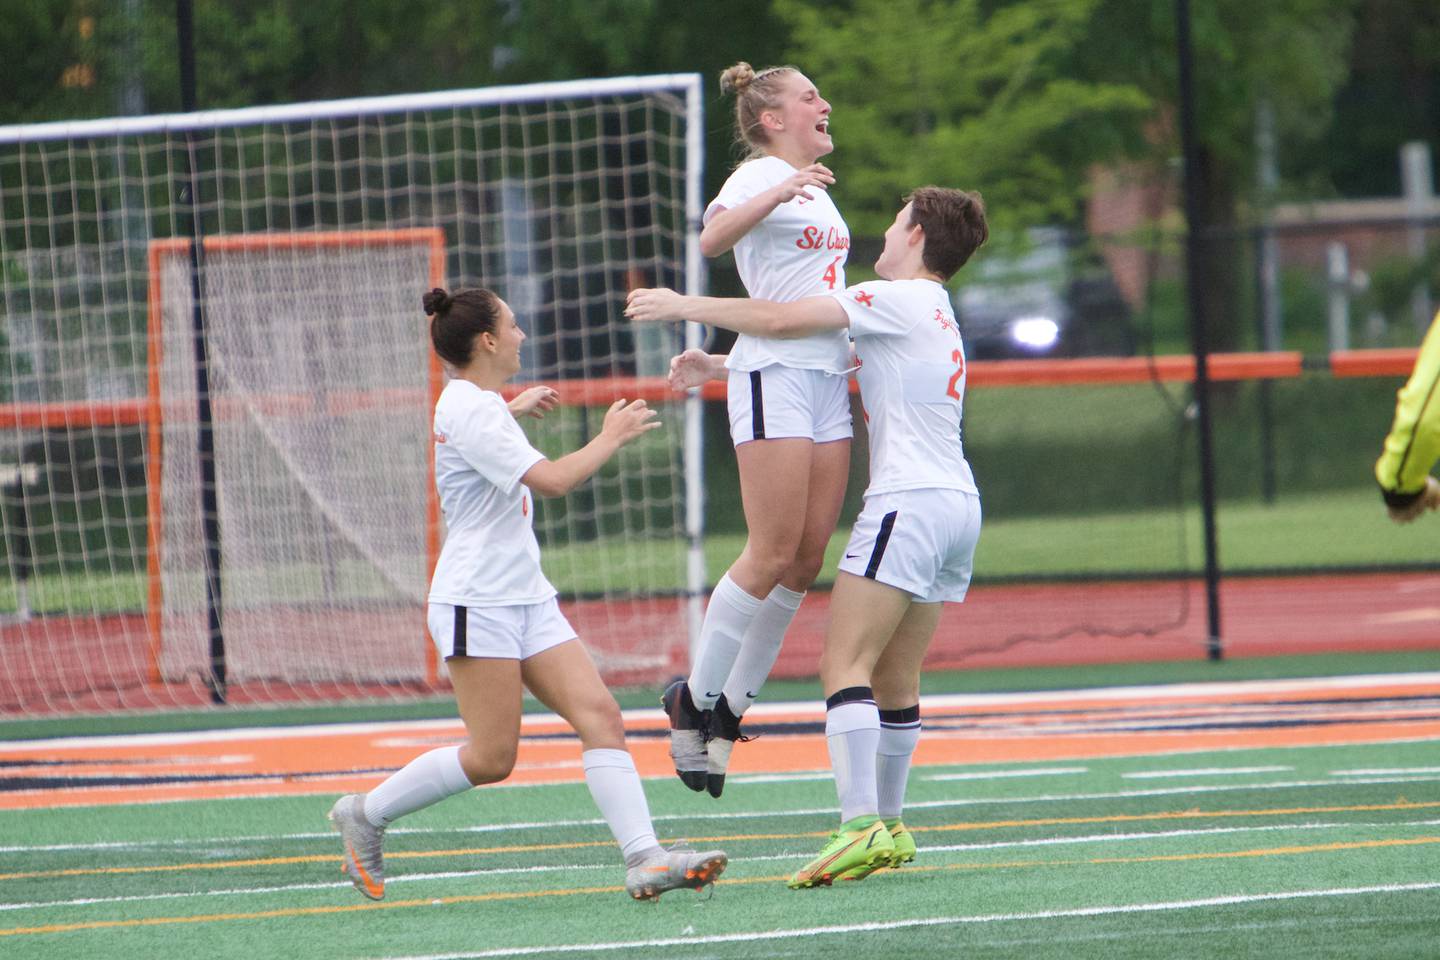 St. Charles East's Grace Williams (4) celebrates scoring a goal against St. Charles North at the Class 3A Sectional Final on May 27, 2022 in St. Charles.